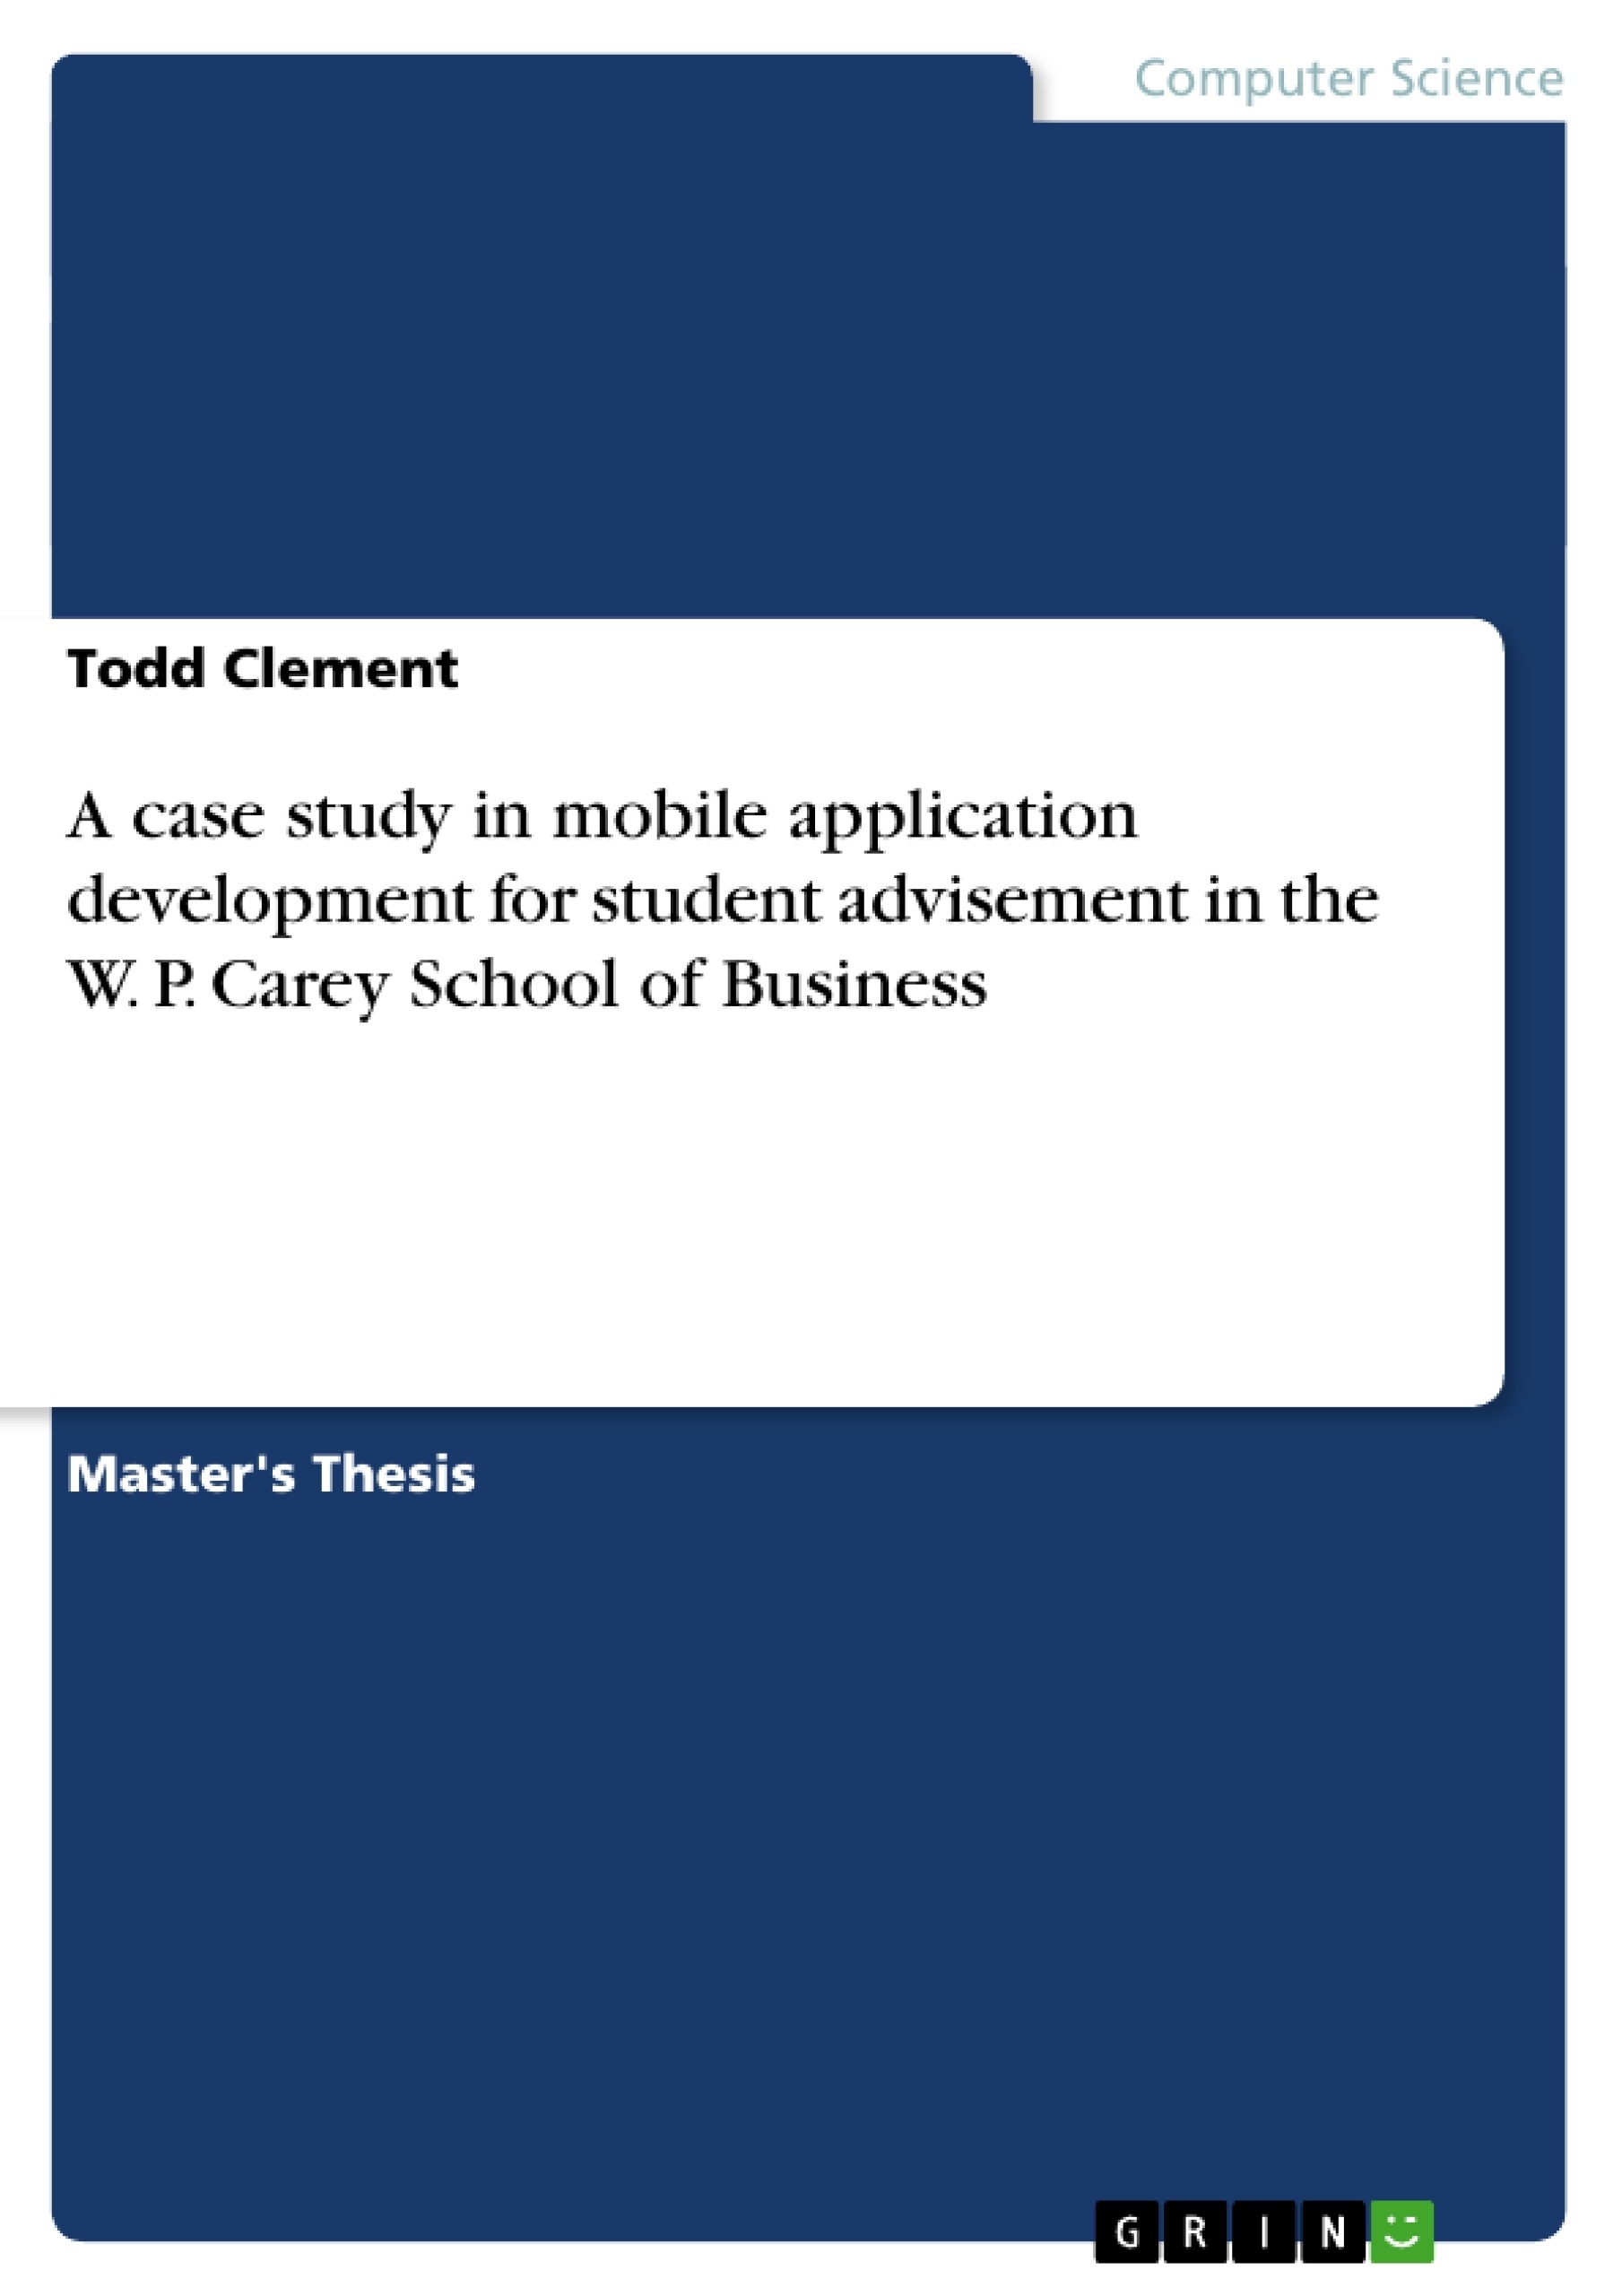 Title: A case study in mobile application development for student advisement in the W. P. Carey School of Business